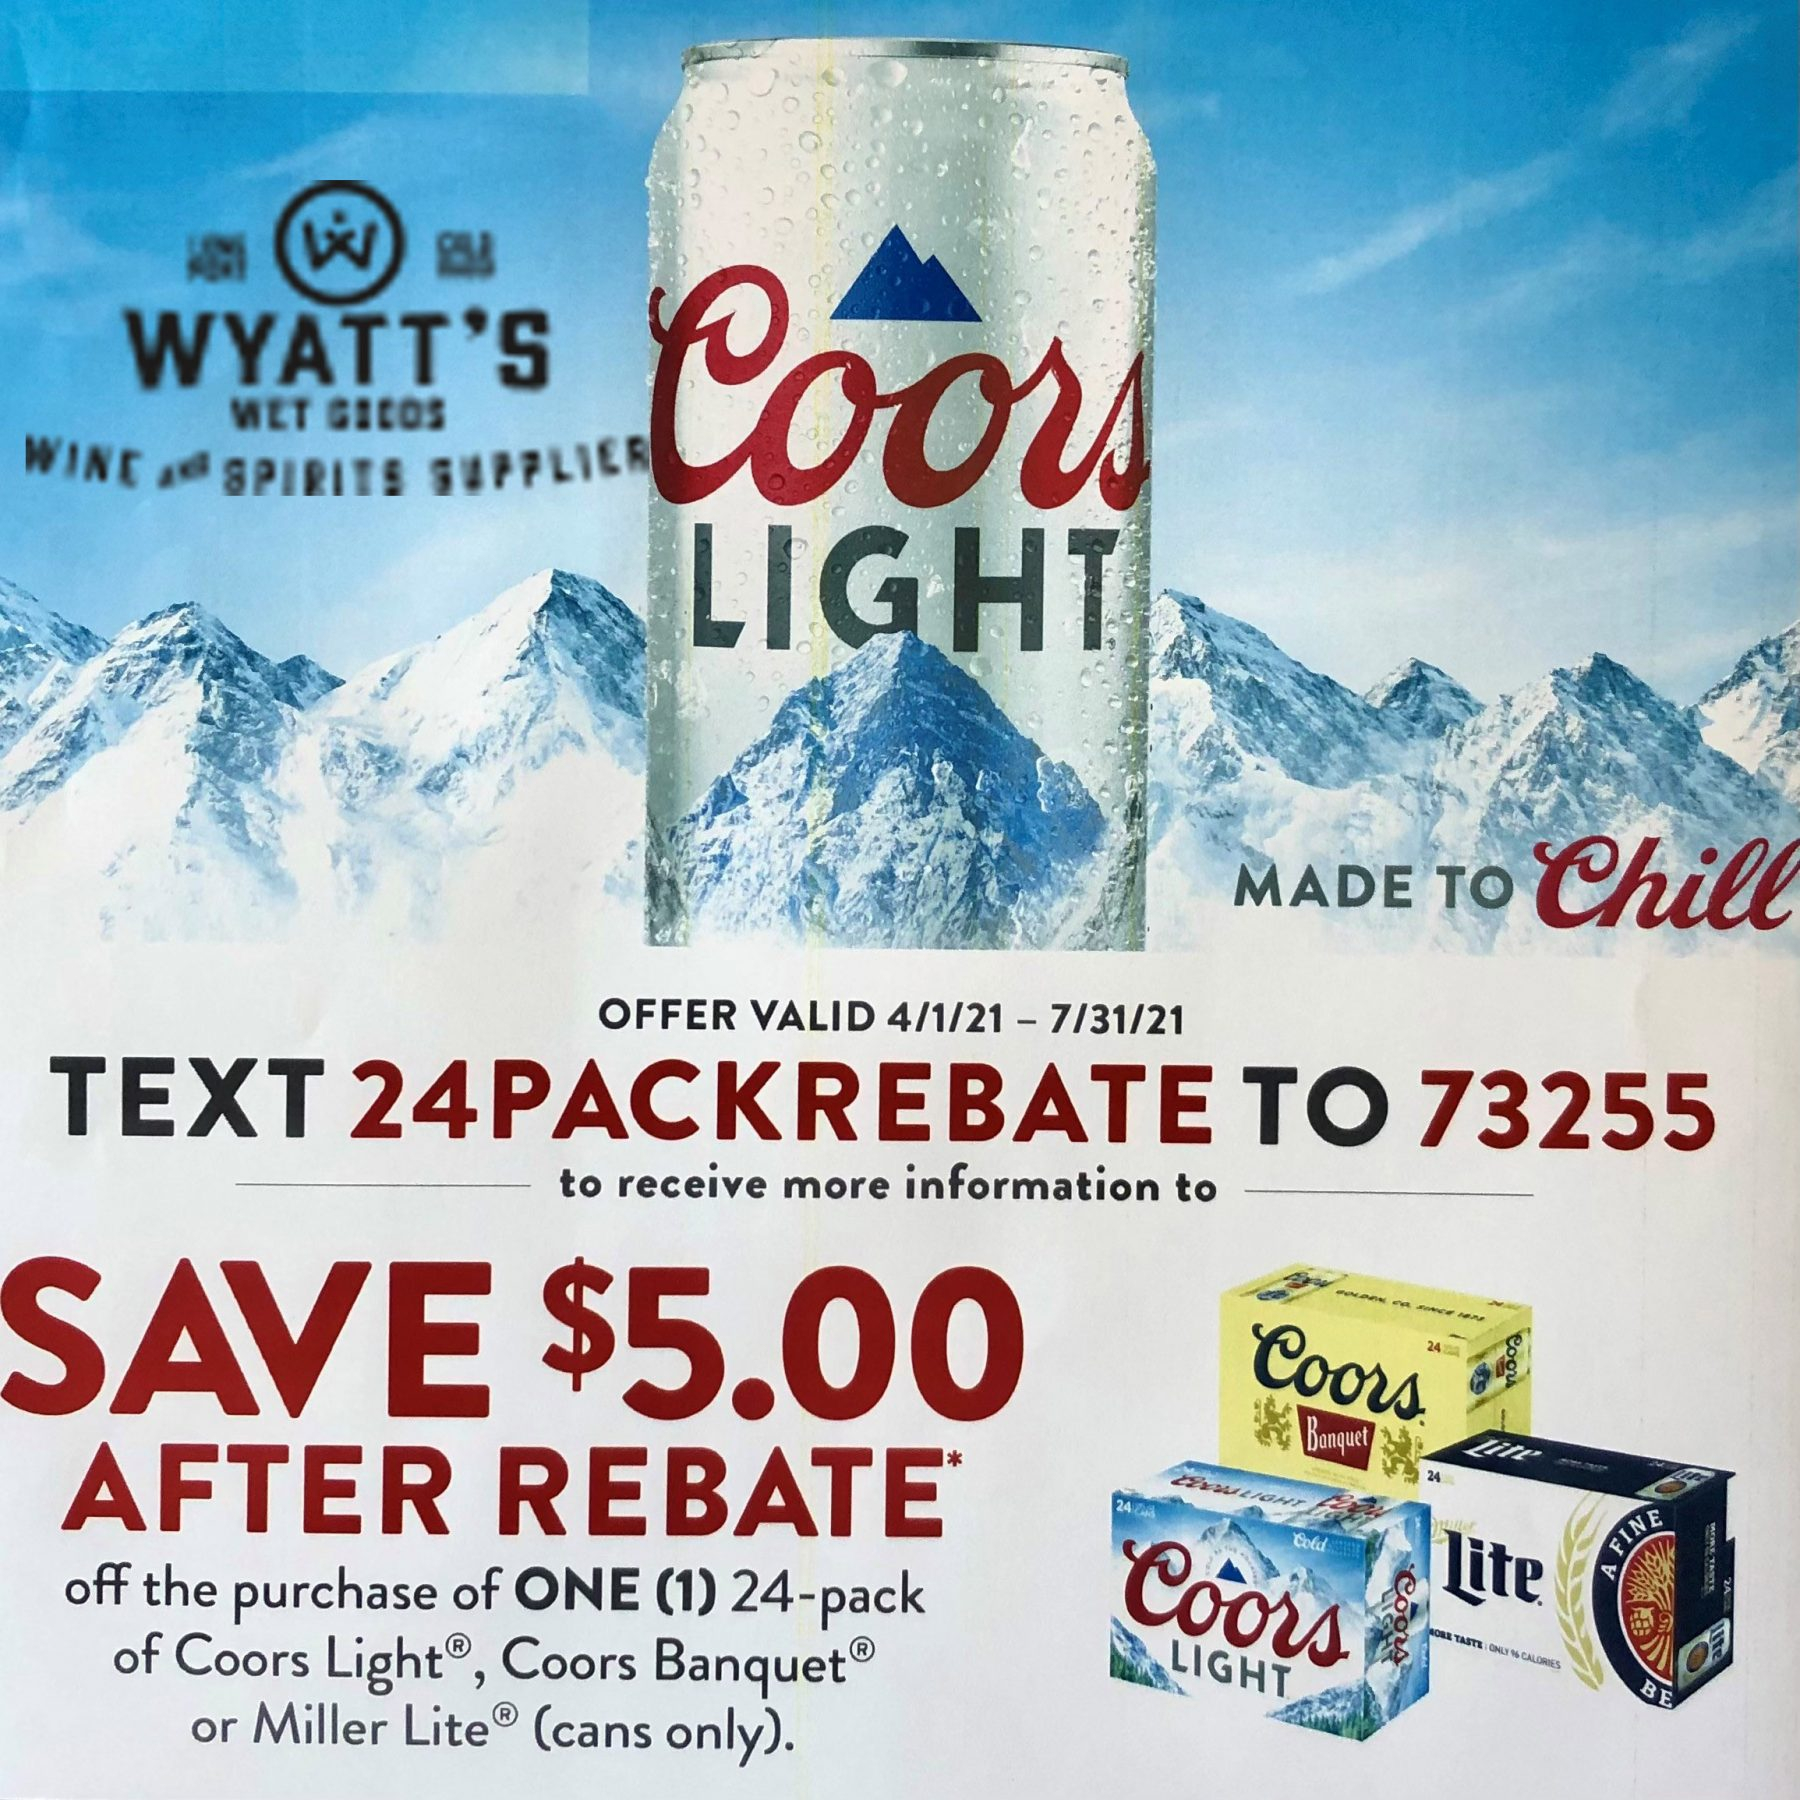 Only A Few Days Left The Great Rebate From Coors Through July 31st At Wyatt s Wet Goods Wyatt s Wet Goods